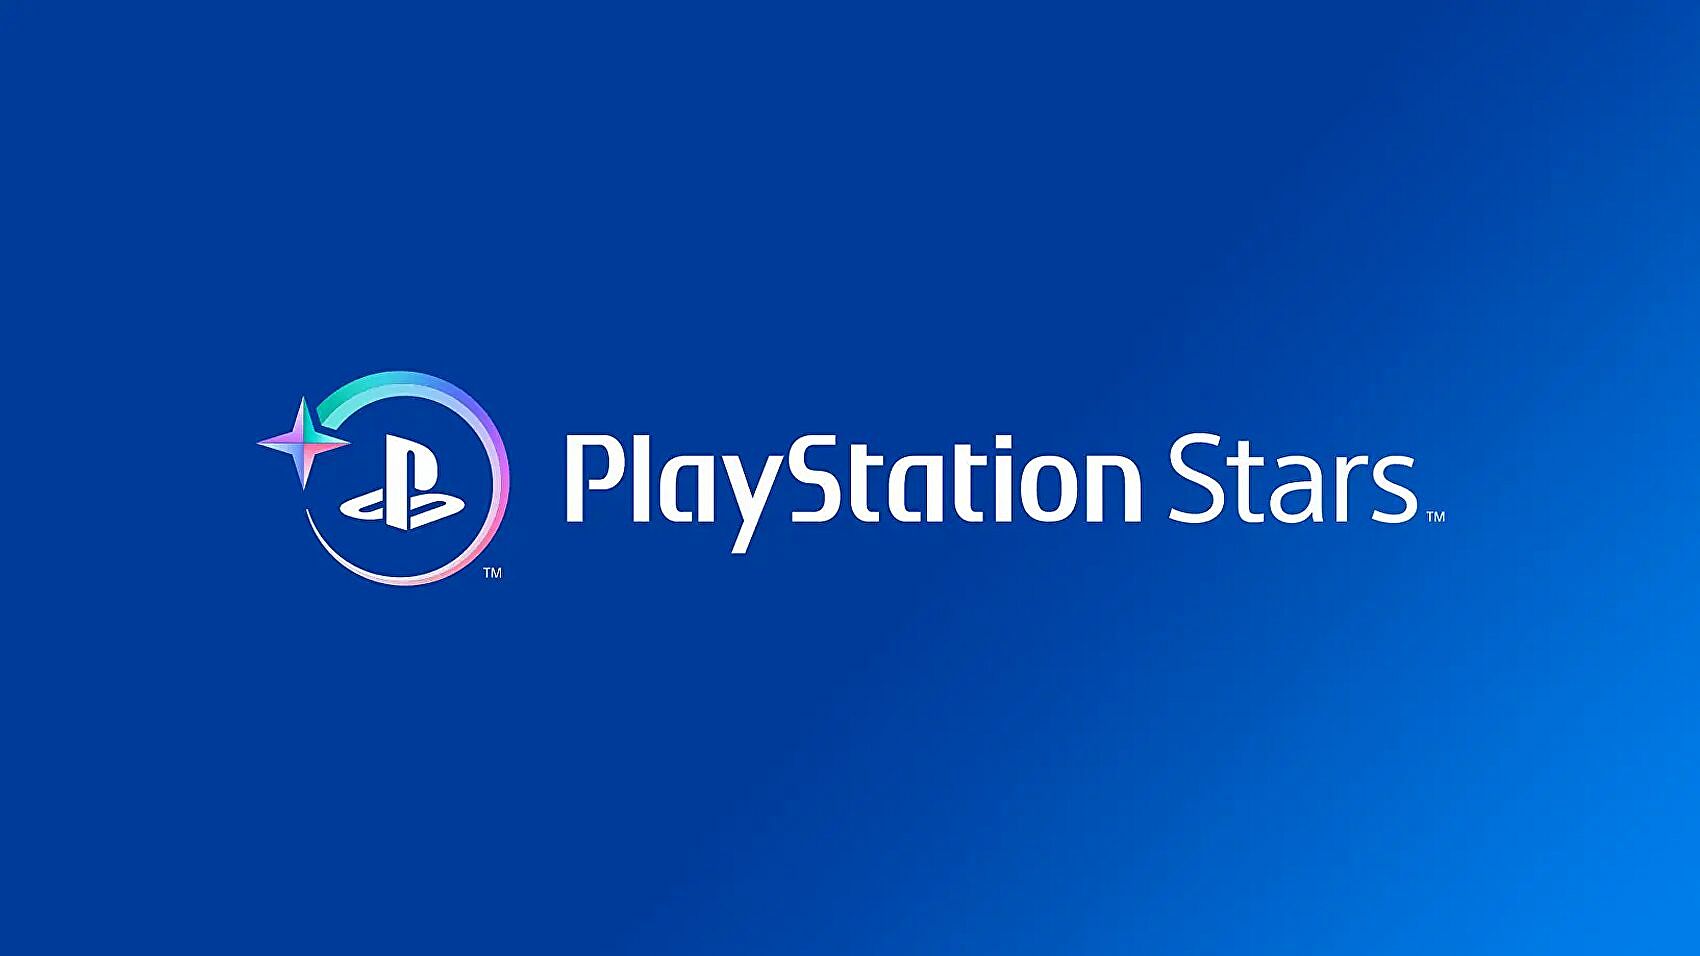 PlayStation Stars apparently gives “priority” customer support to top members